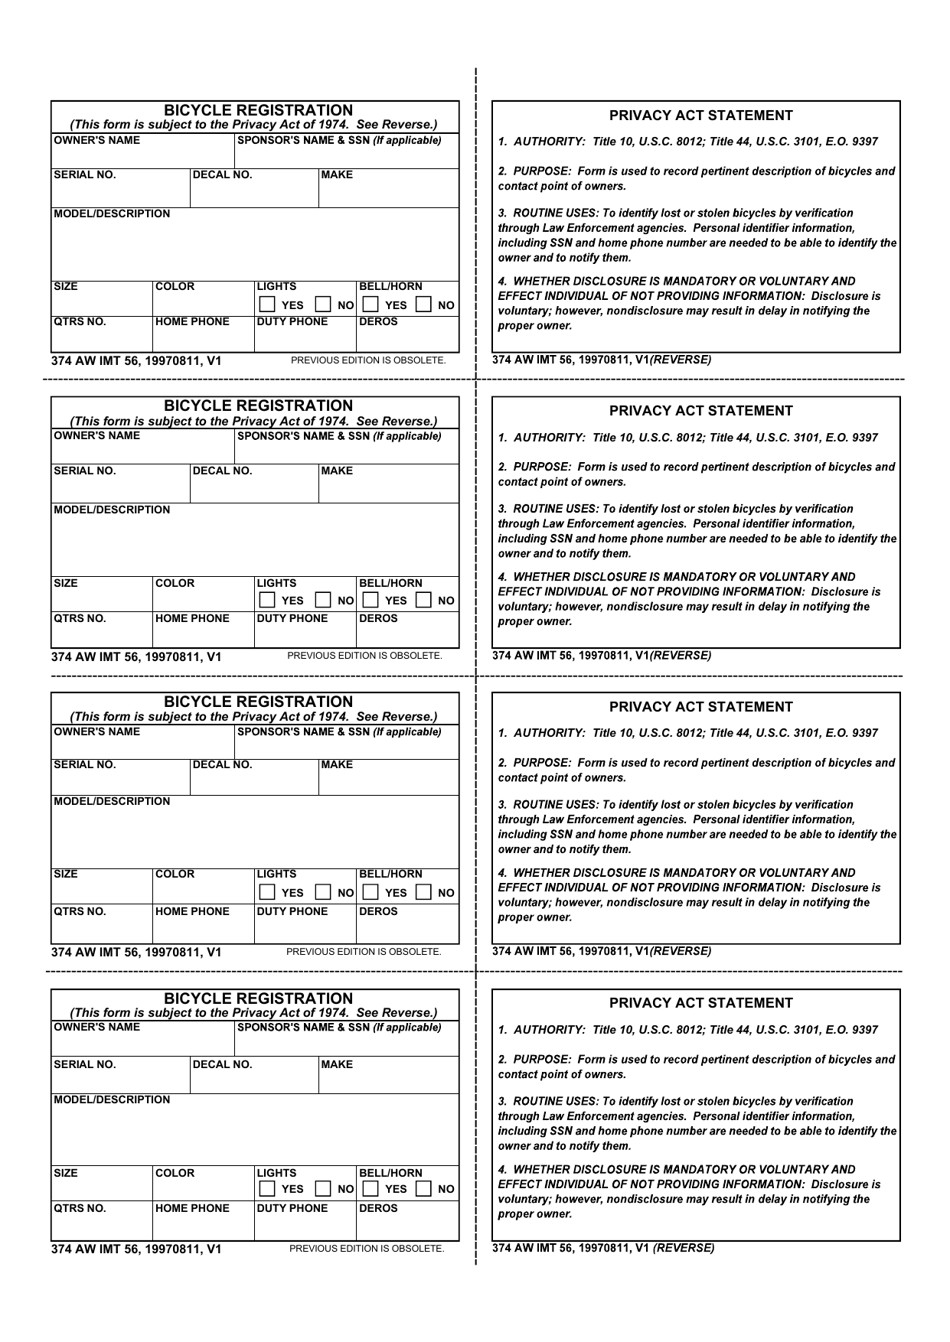 374 AW IMT Form 56 Bicycle Registration, Page 1